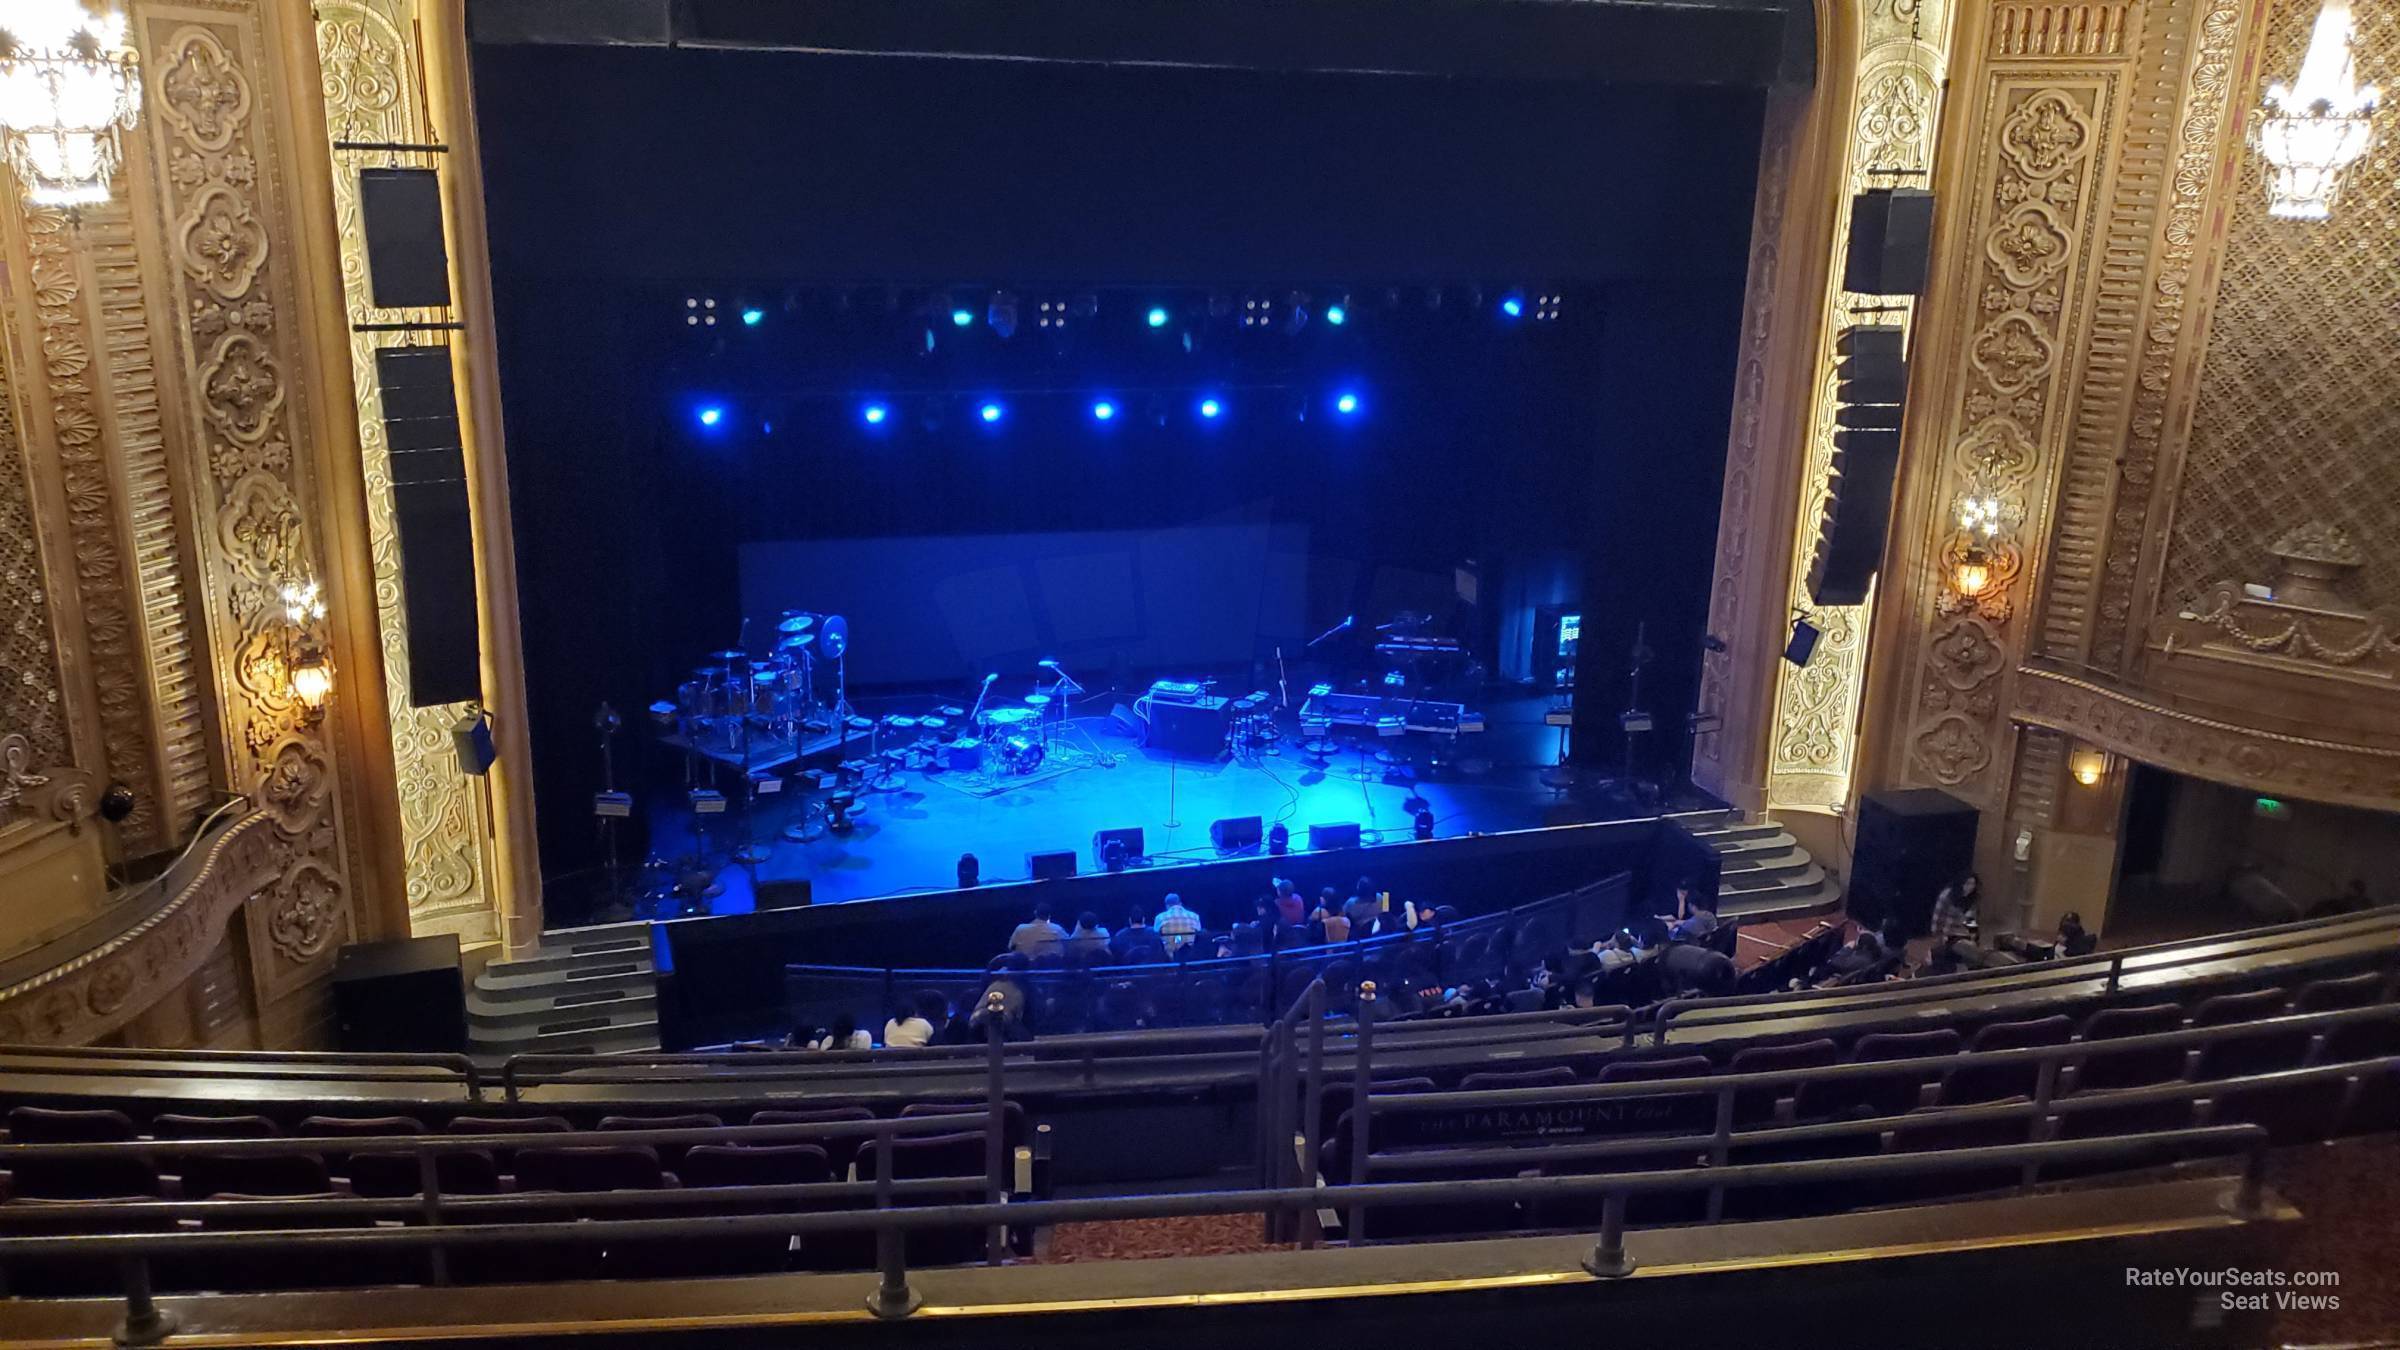 section 14, row e seat view  - paramount theatre - seattle